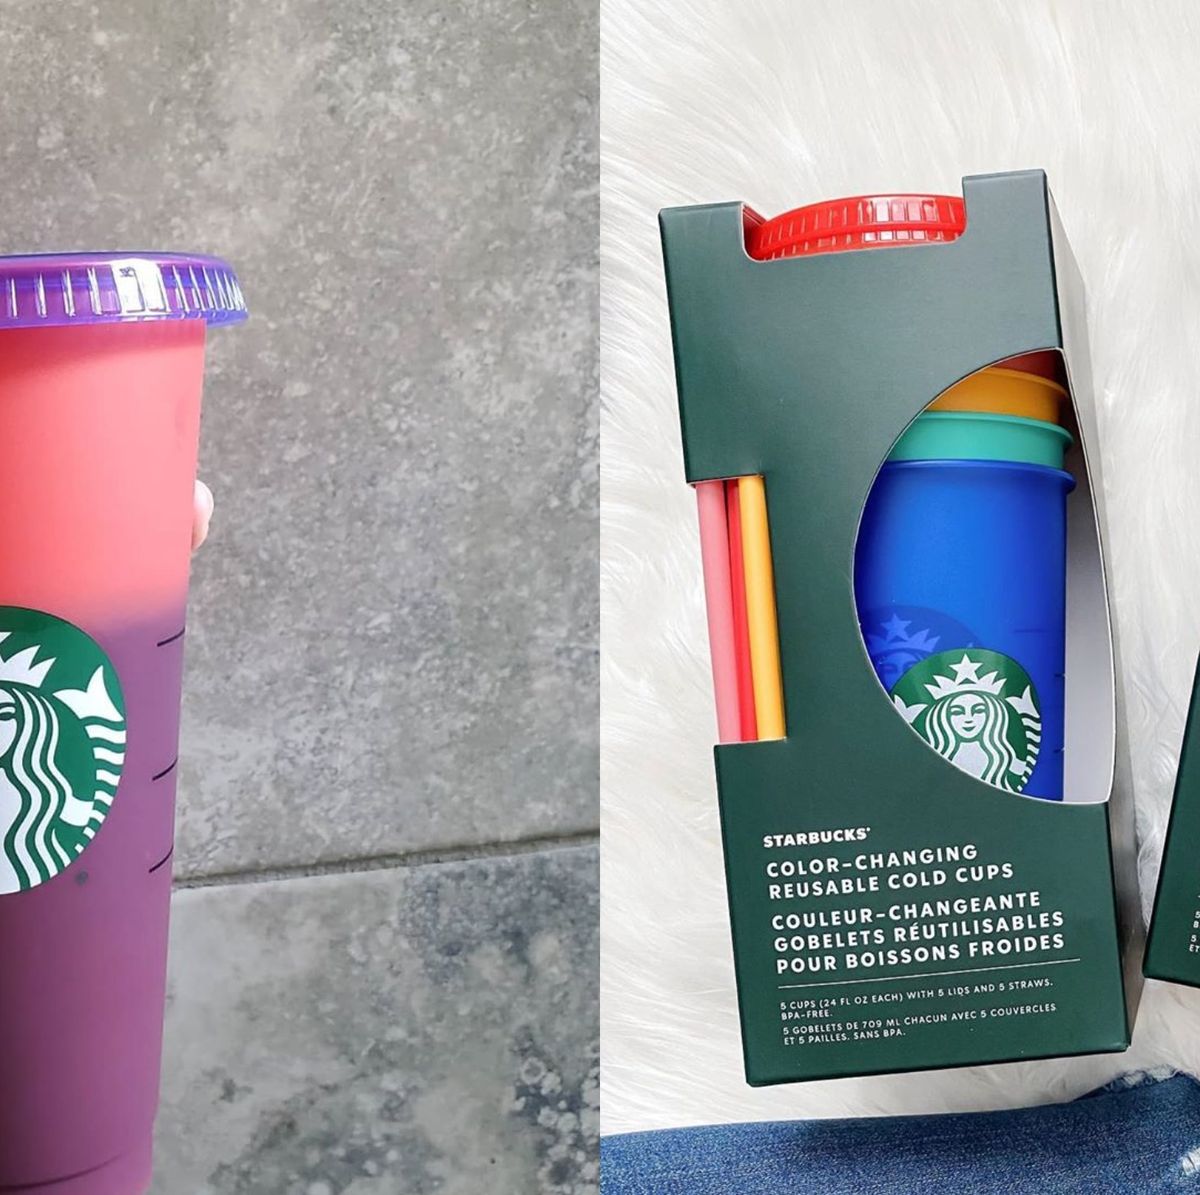 https://hips.hearstapps.com/hmg-prod/images/starbucks-color-changing-cups-1589570744.jpg?crop=0.502xw:1.00xh;0,0&resize=1200:*